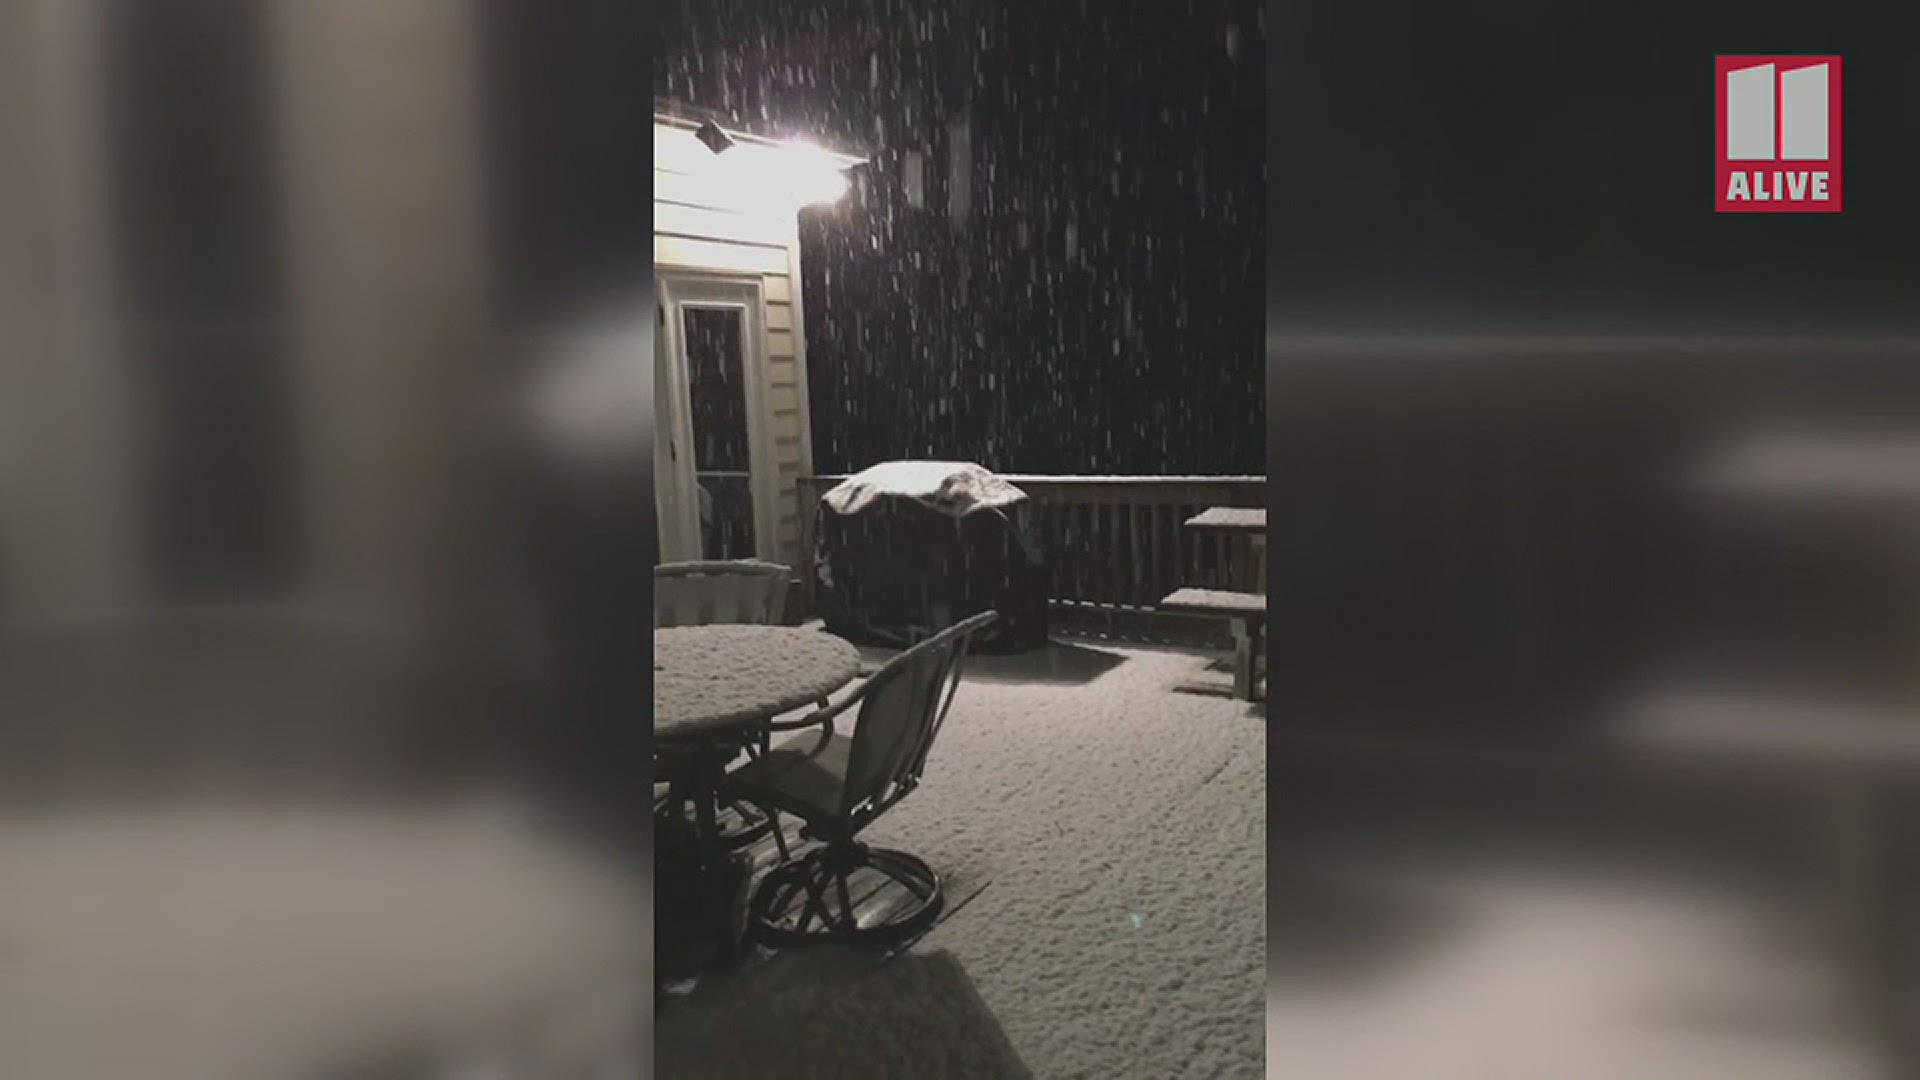 Tom Murphy is seeing some heavy snow on a deck in Pendergrass, Georgia. In his own words, it's "snowing big-time" in the area tonight.